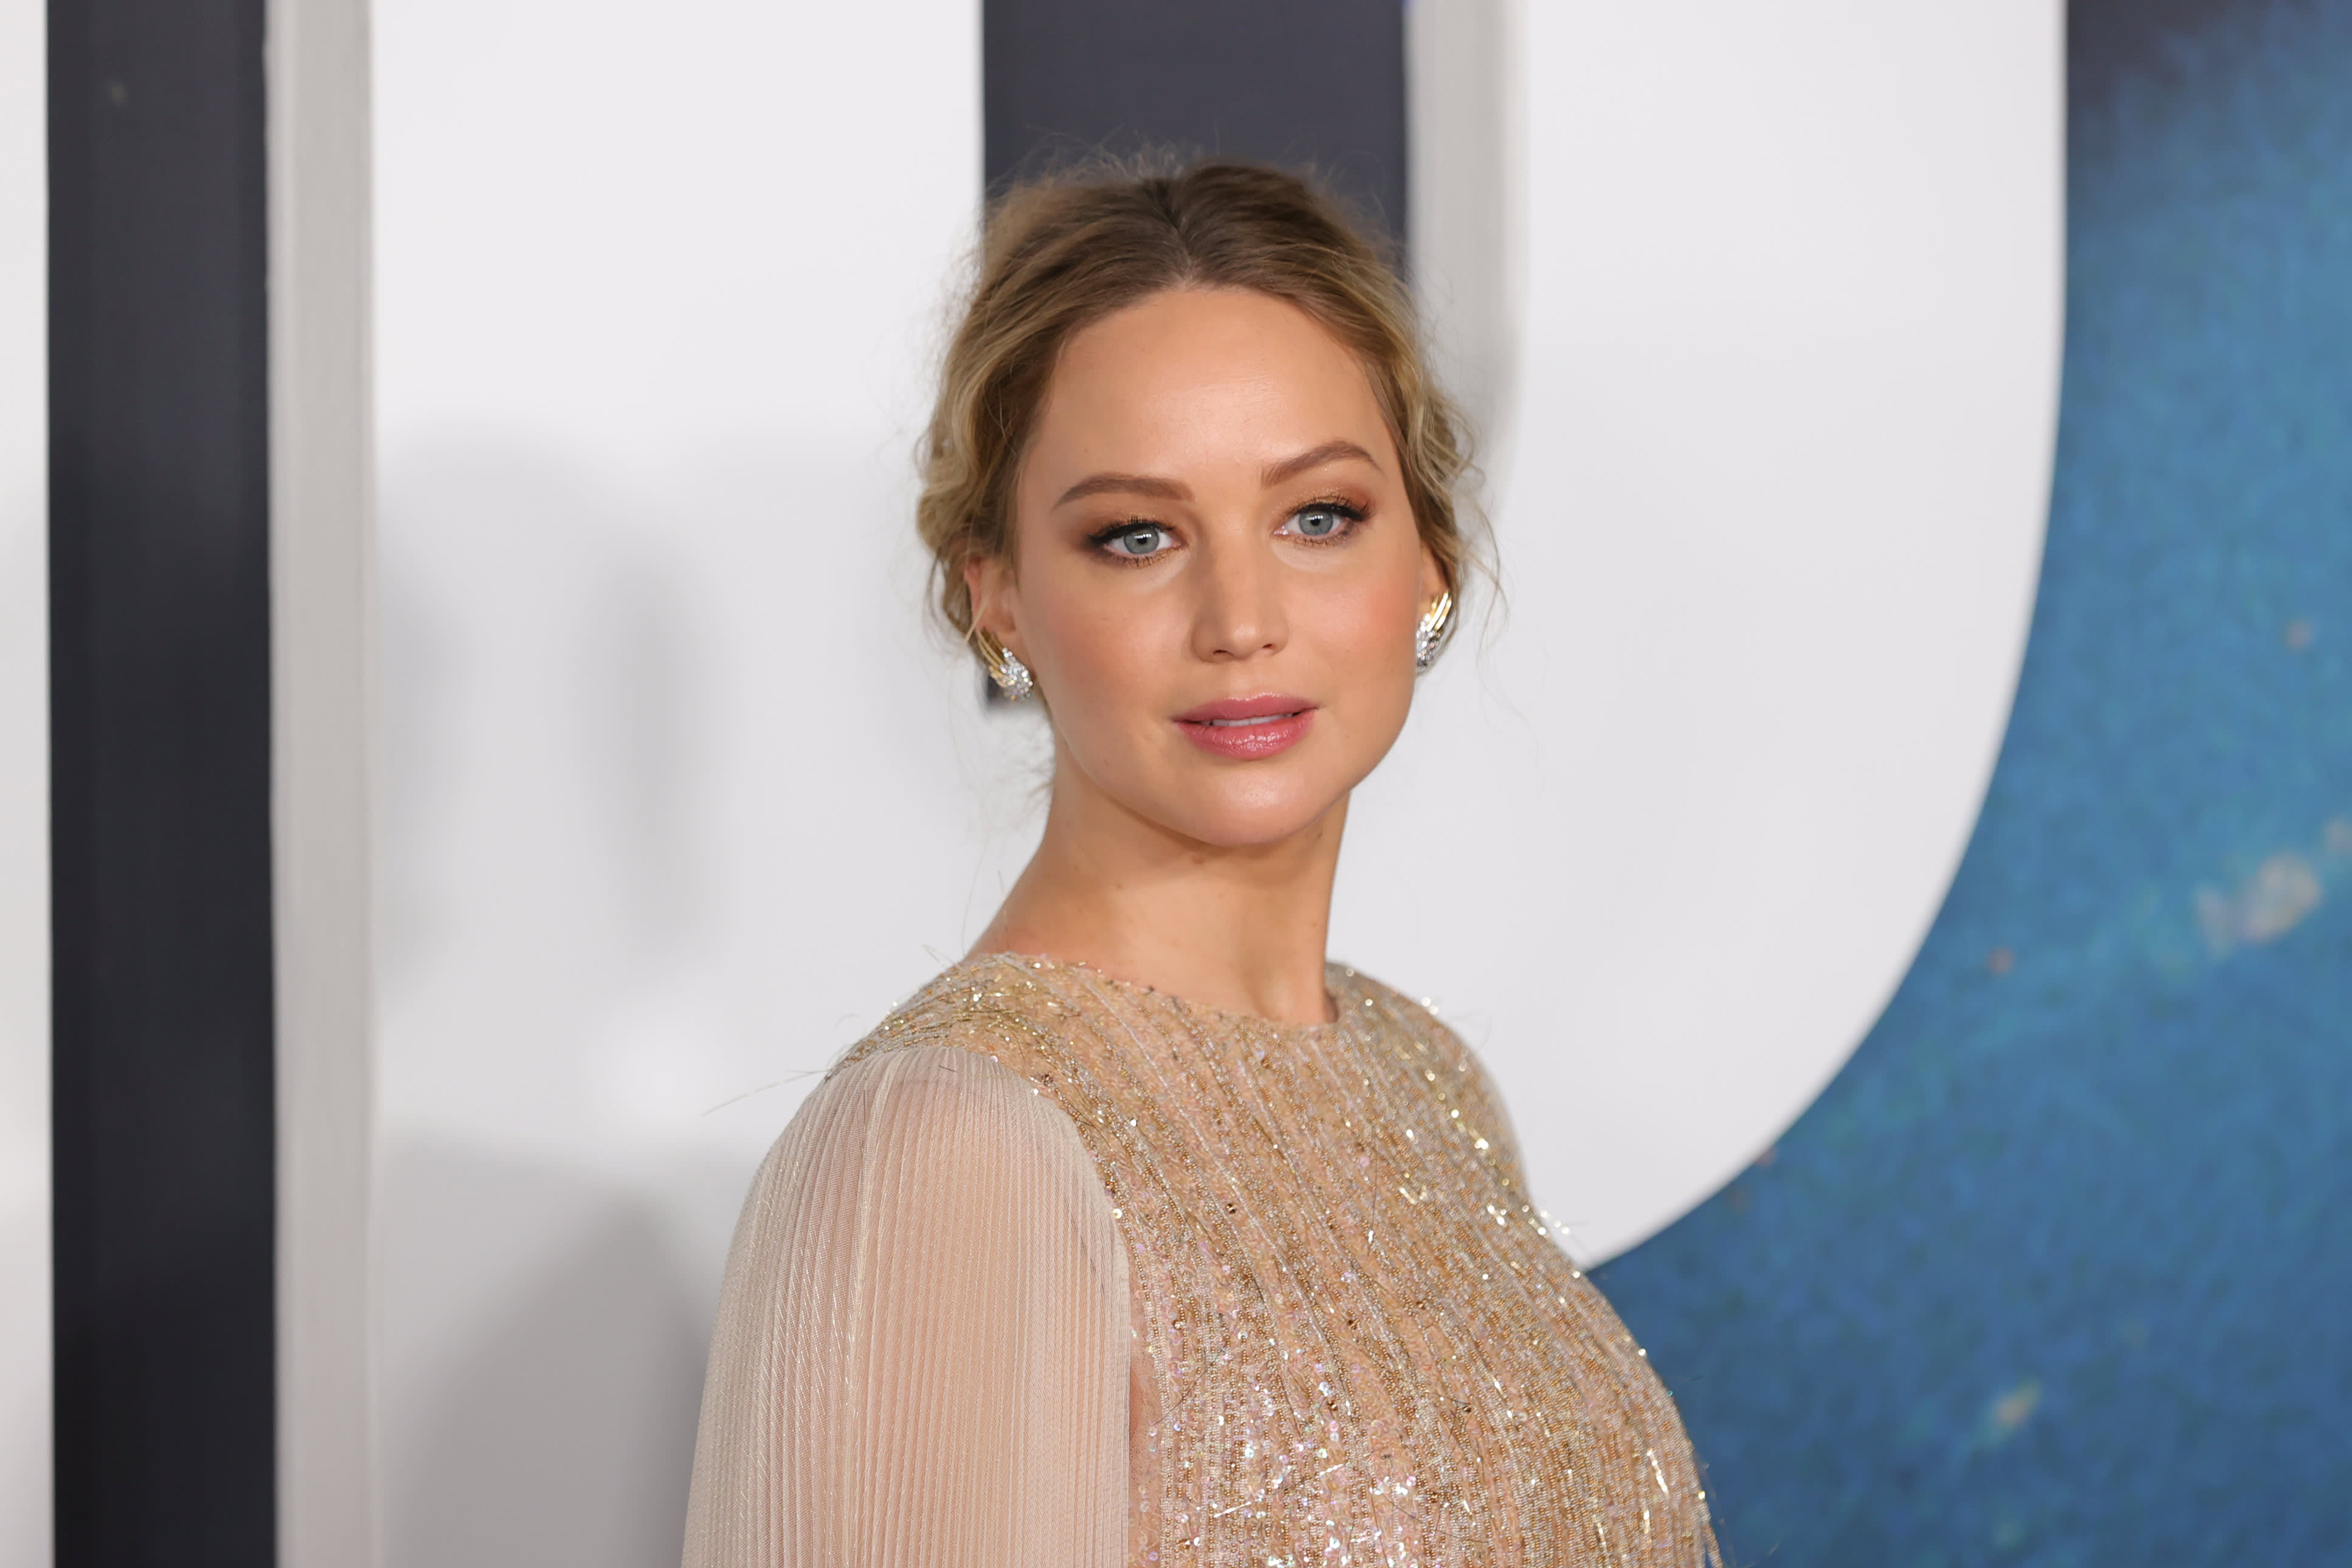 Jennifer Lawrence slams Hollywood gender pay gap in Vogue interview pic